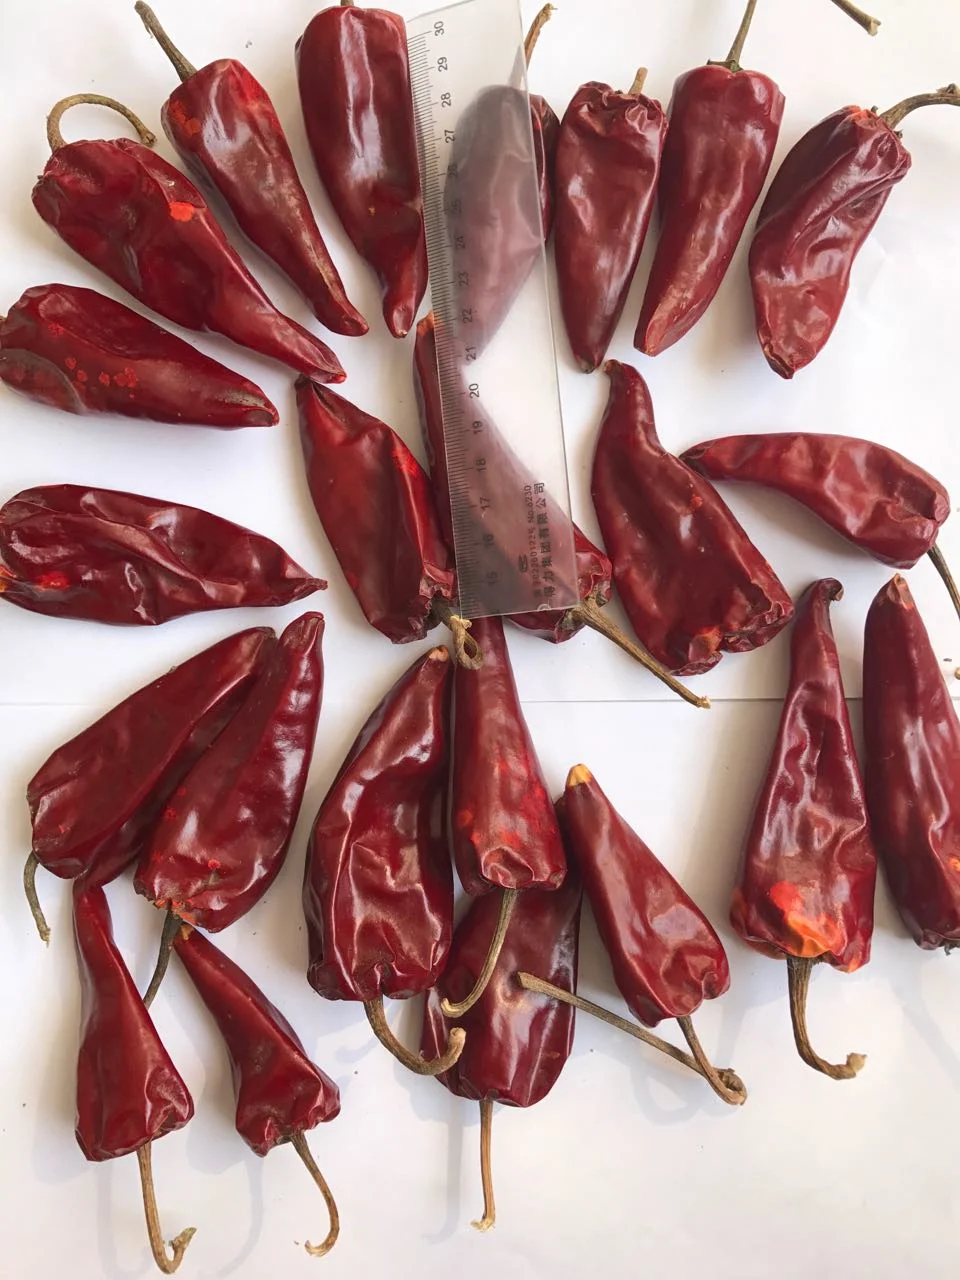 Wholesale Dried Red Yidu Chili Pepper High Quality Low MOQ Newest Crop